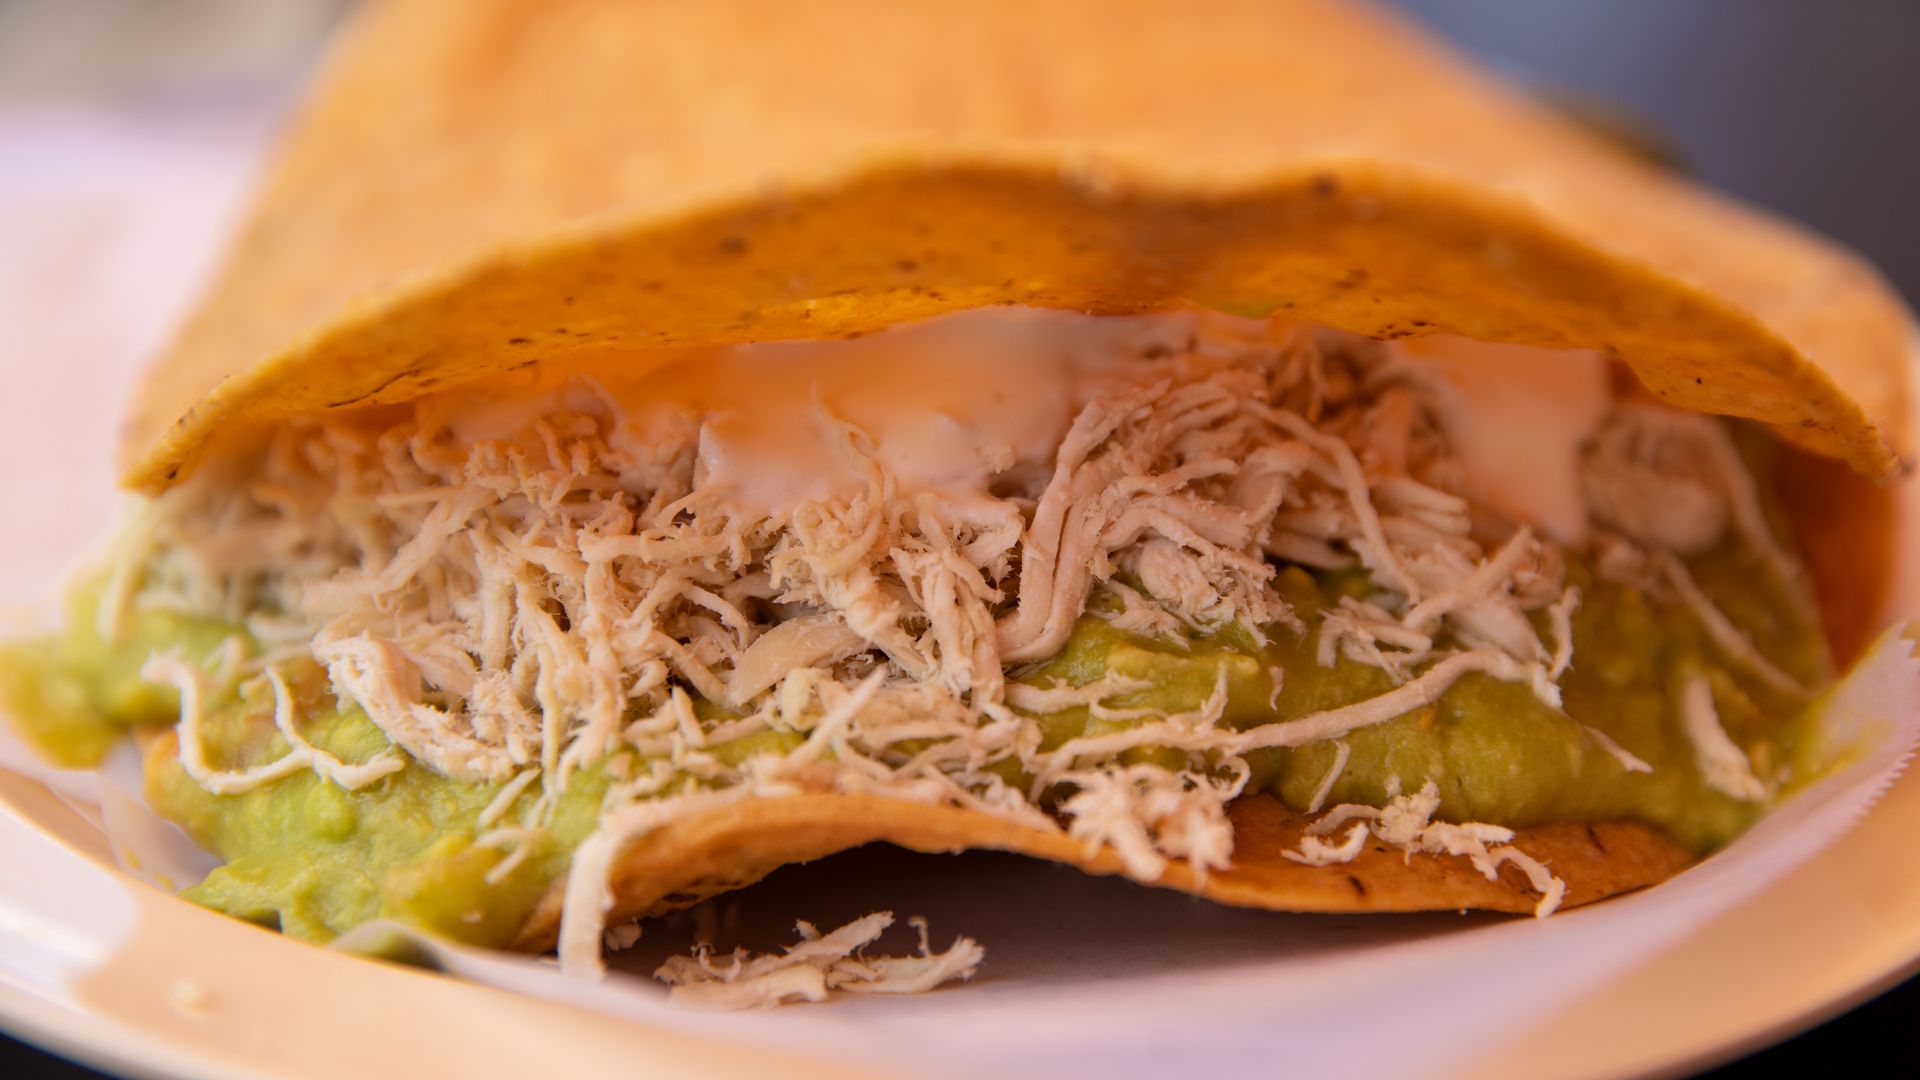 Tostada siberia, wth a mound of shredded chicken in the middle,  from the upcoming La Malinche. 